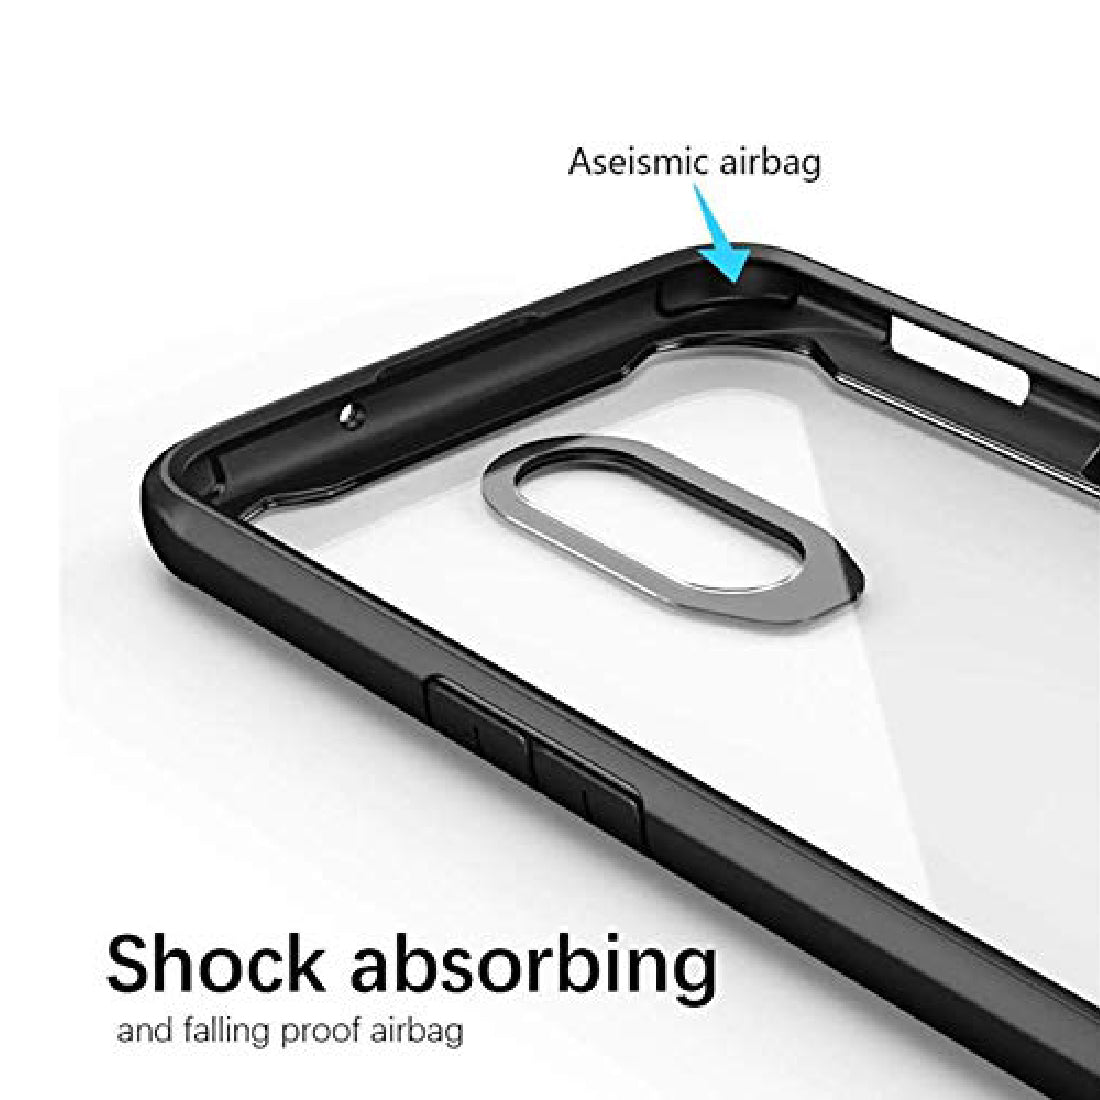 Shockproof Hybrid Cover for OnePlus 7